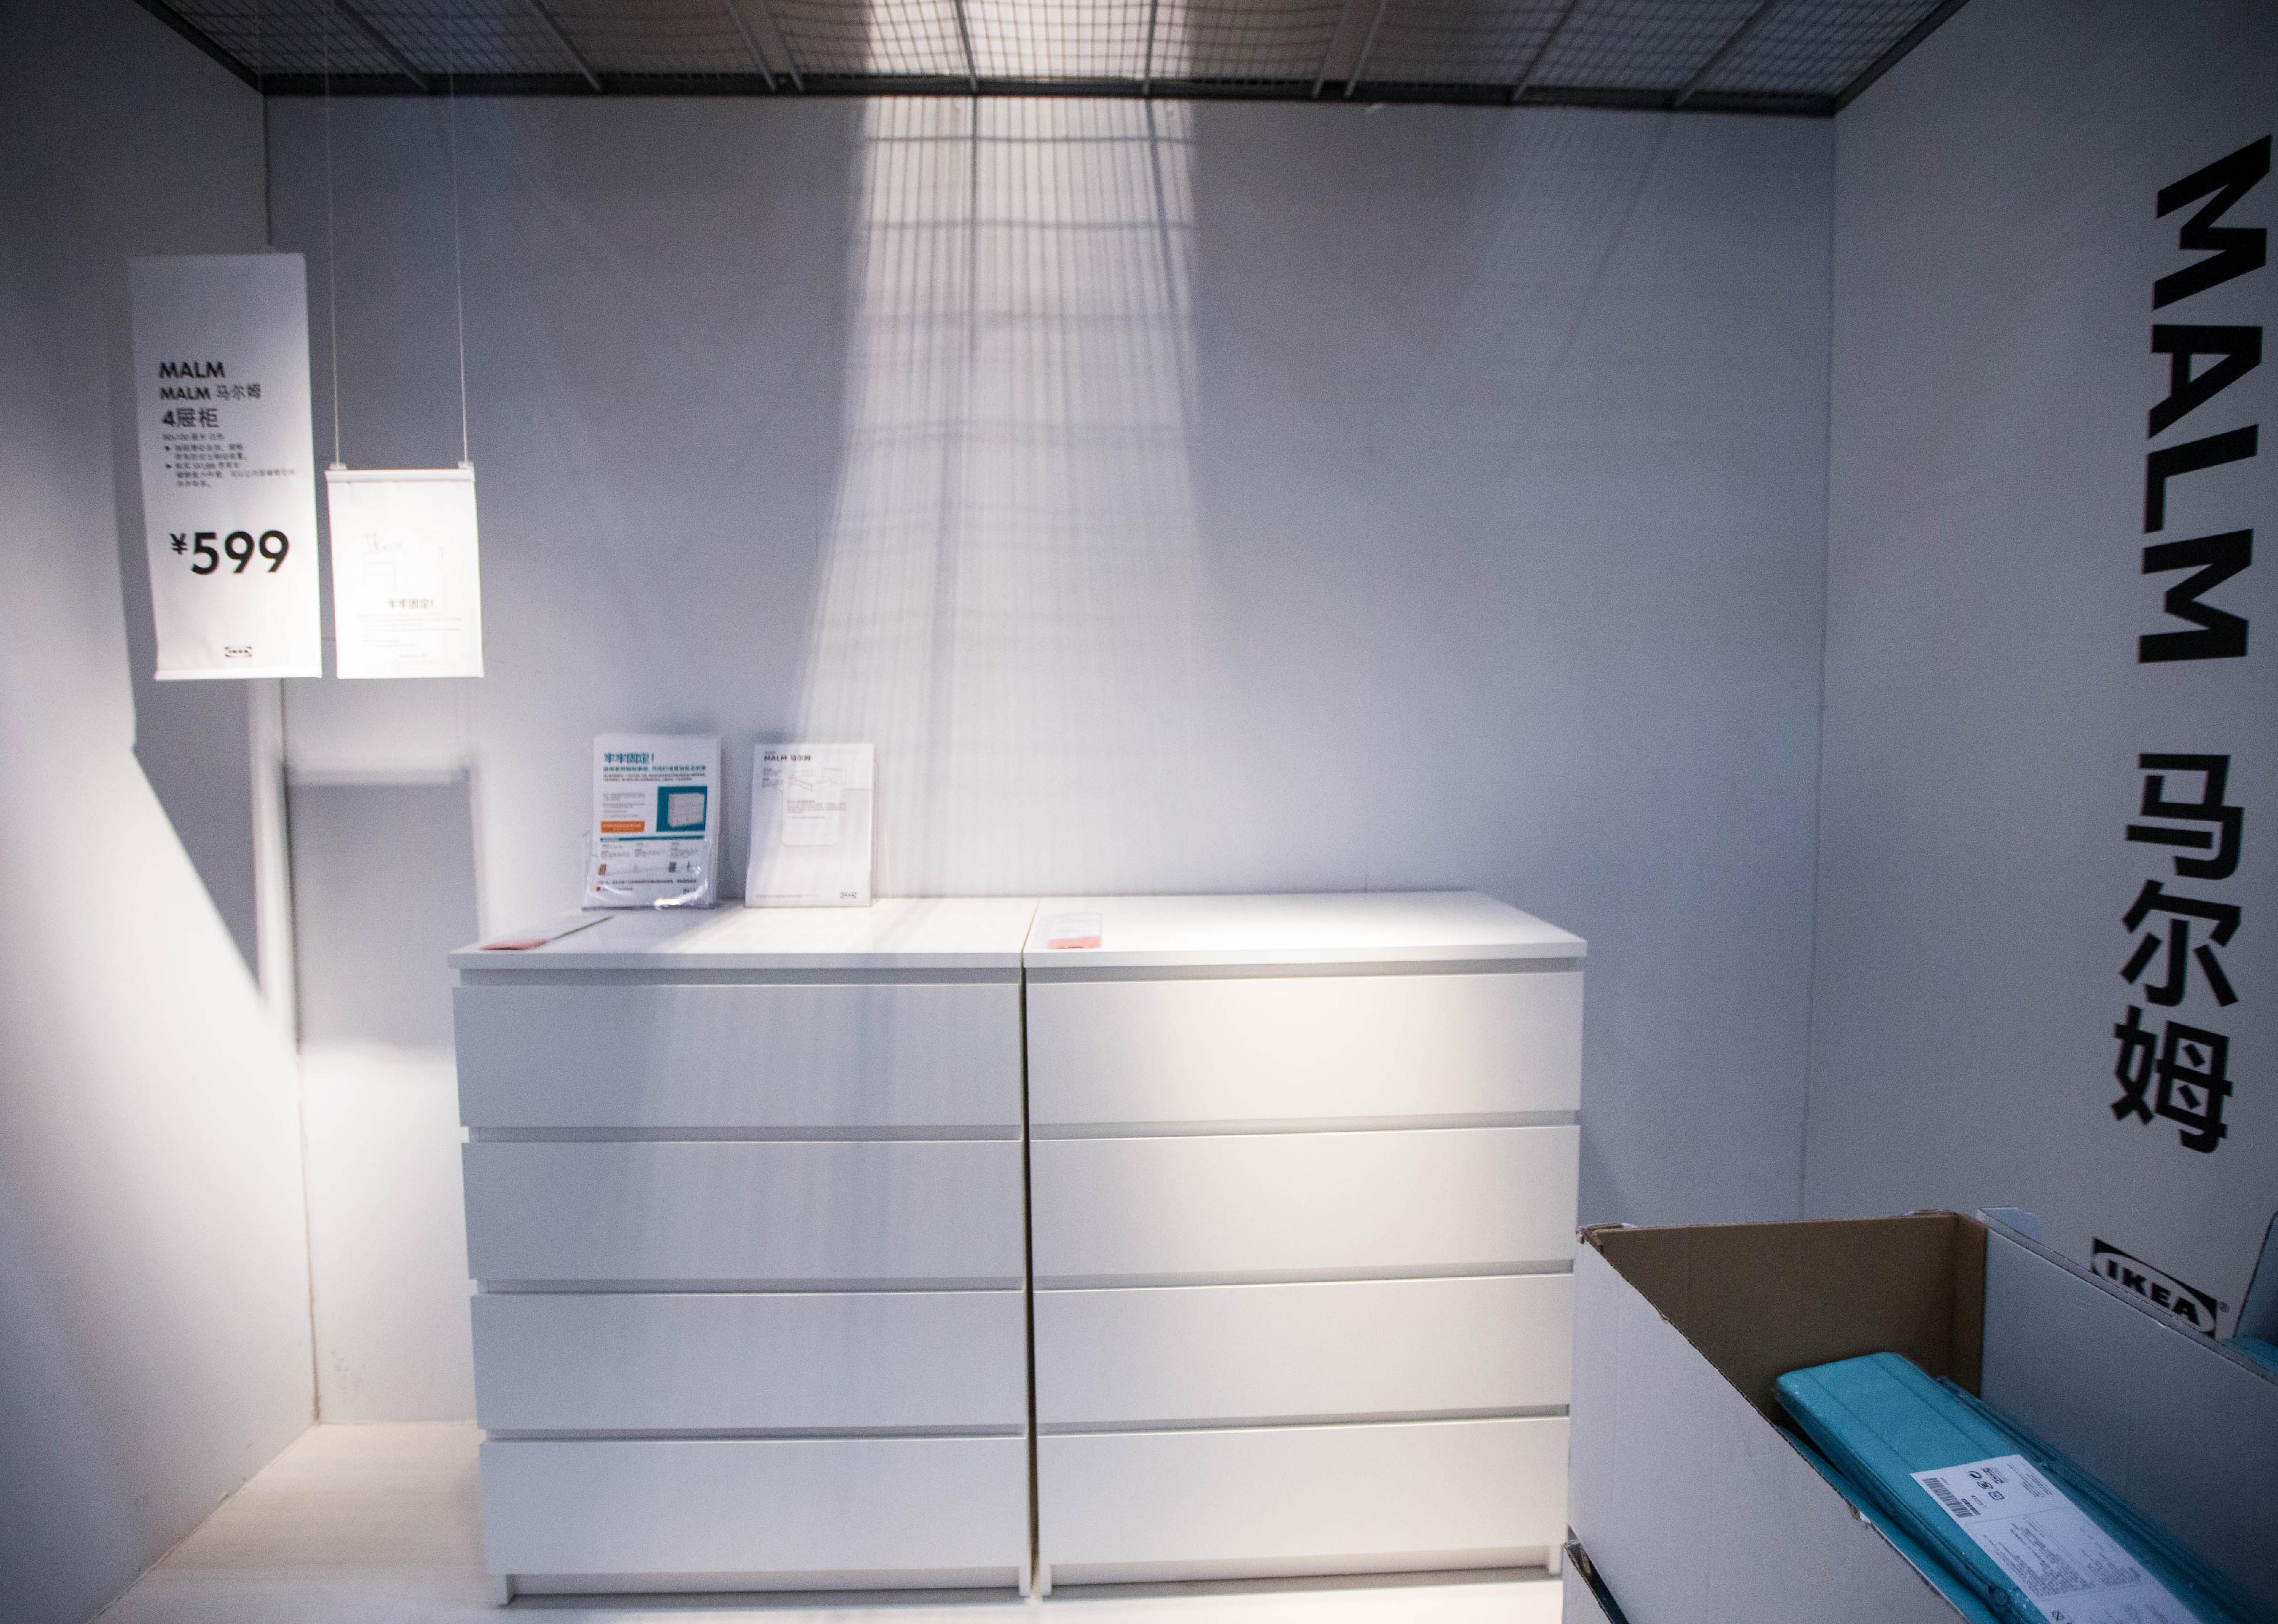 A white dresser without pulls in a white room at Ikea.